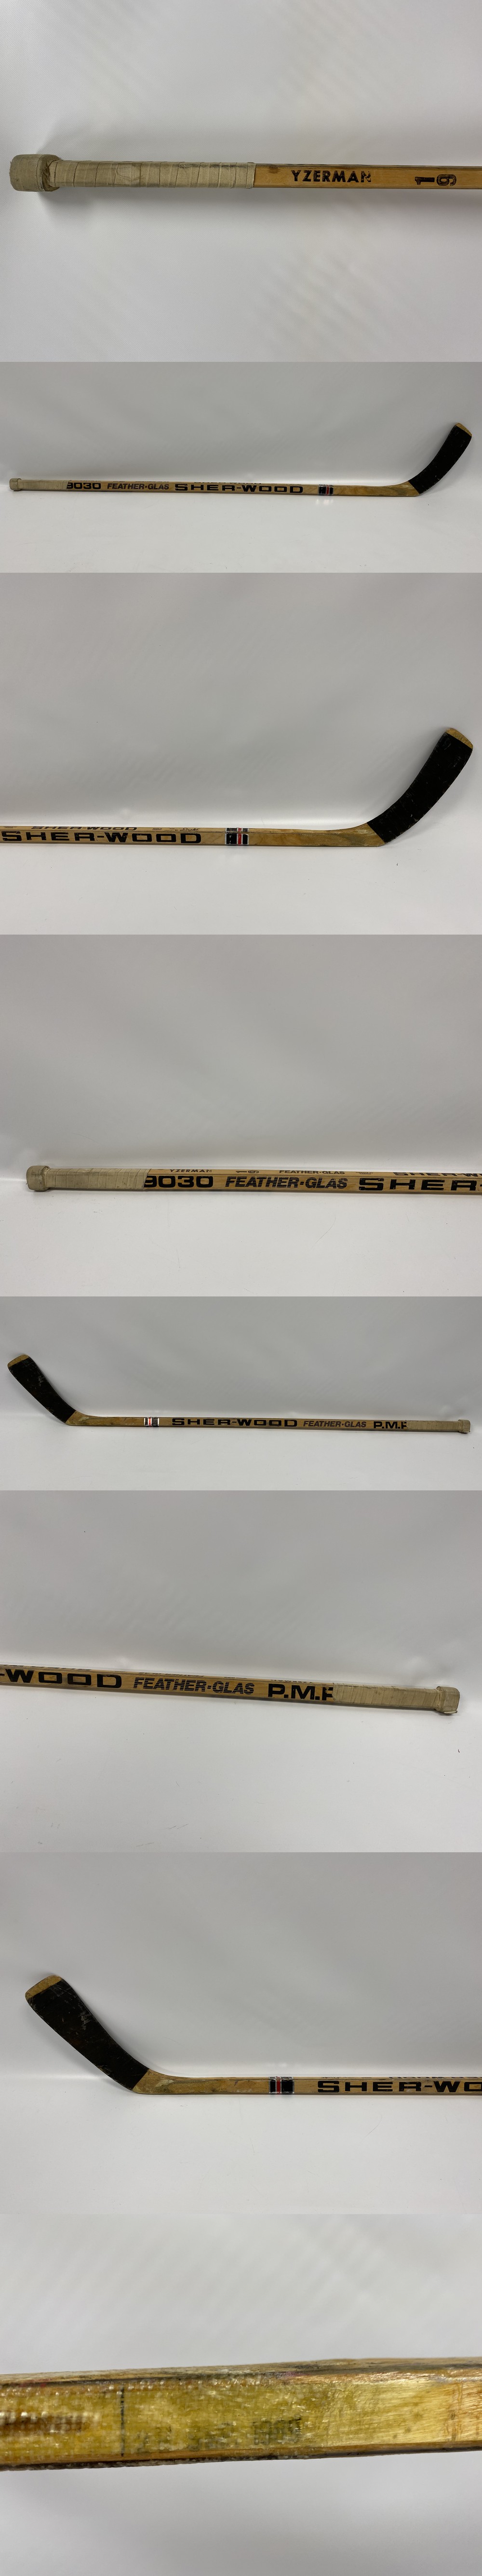 1989 DETROIT RED WINGS S.YZERMAN GAME USED STICK photo